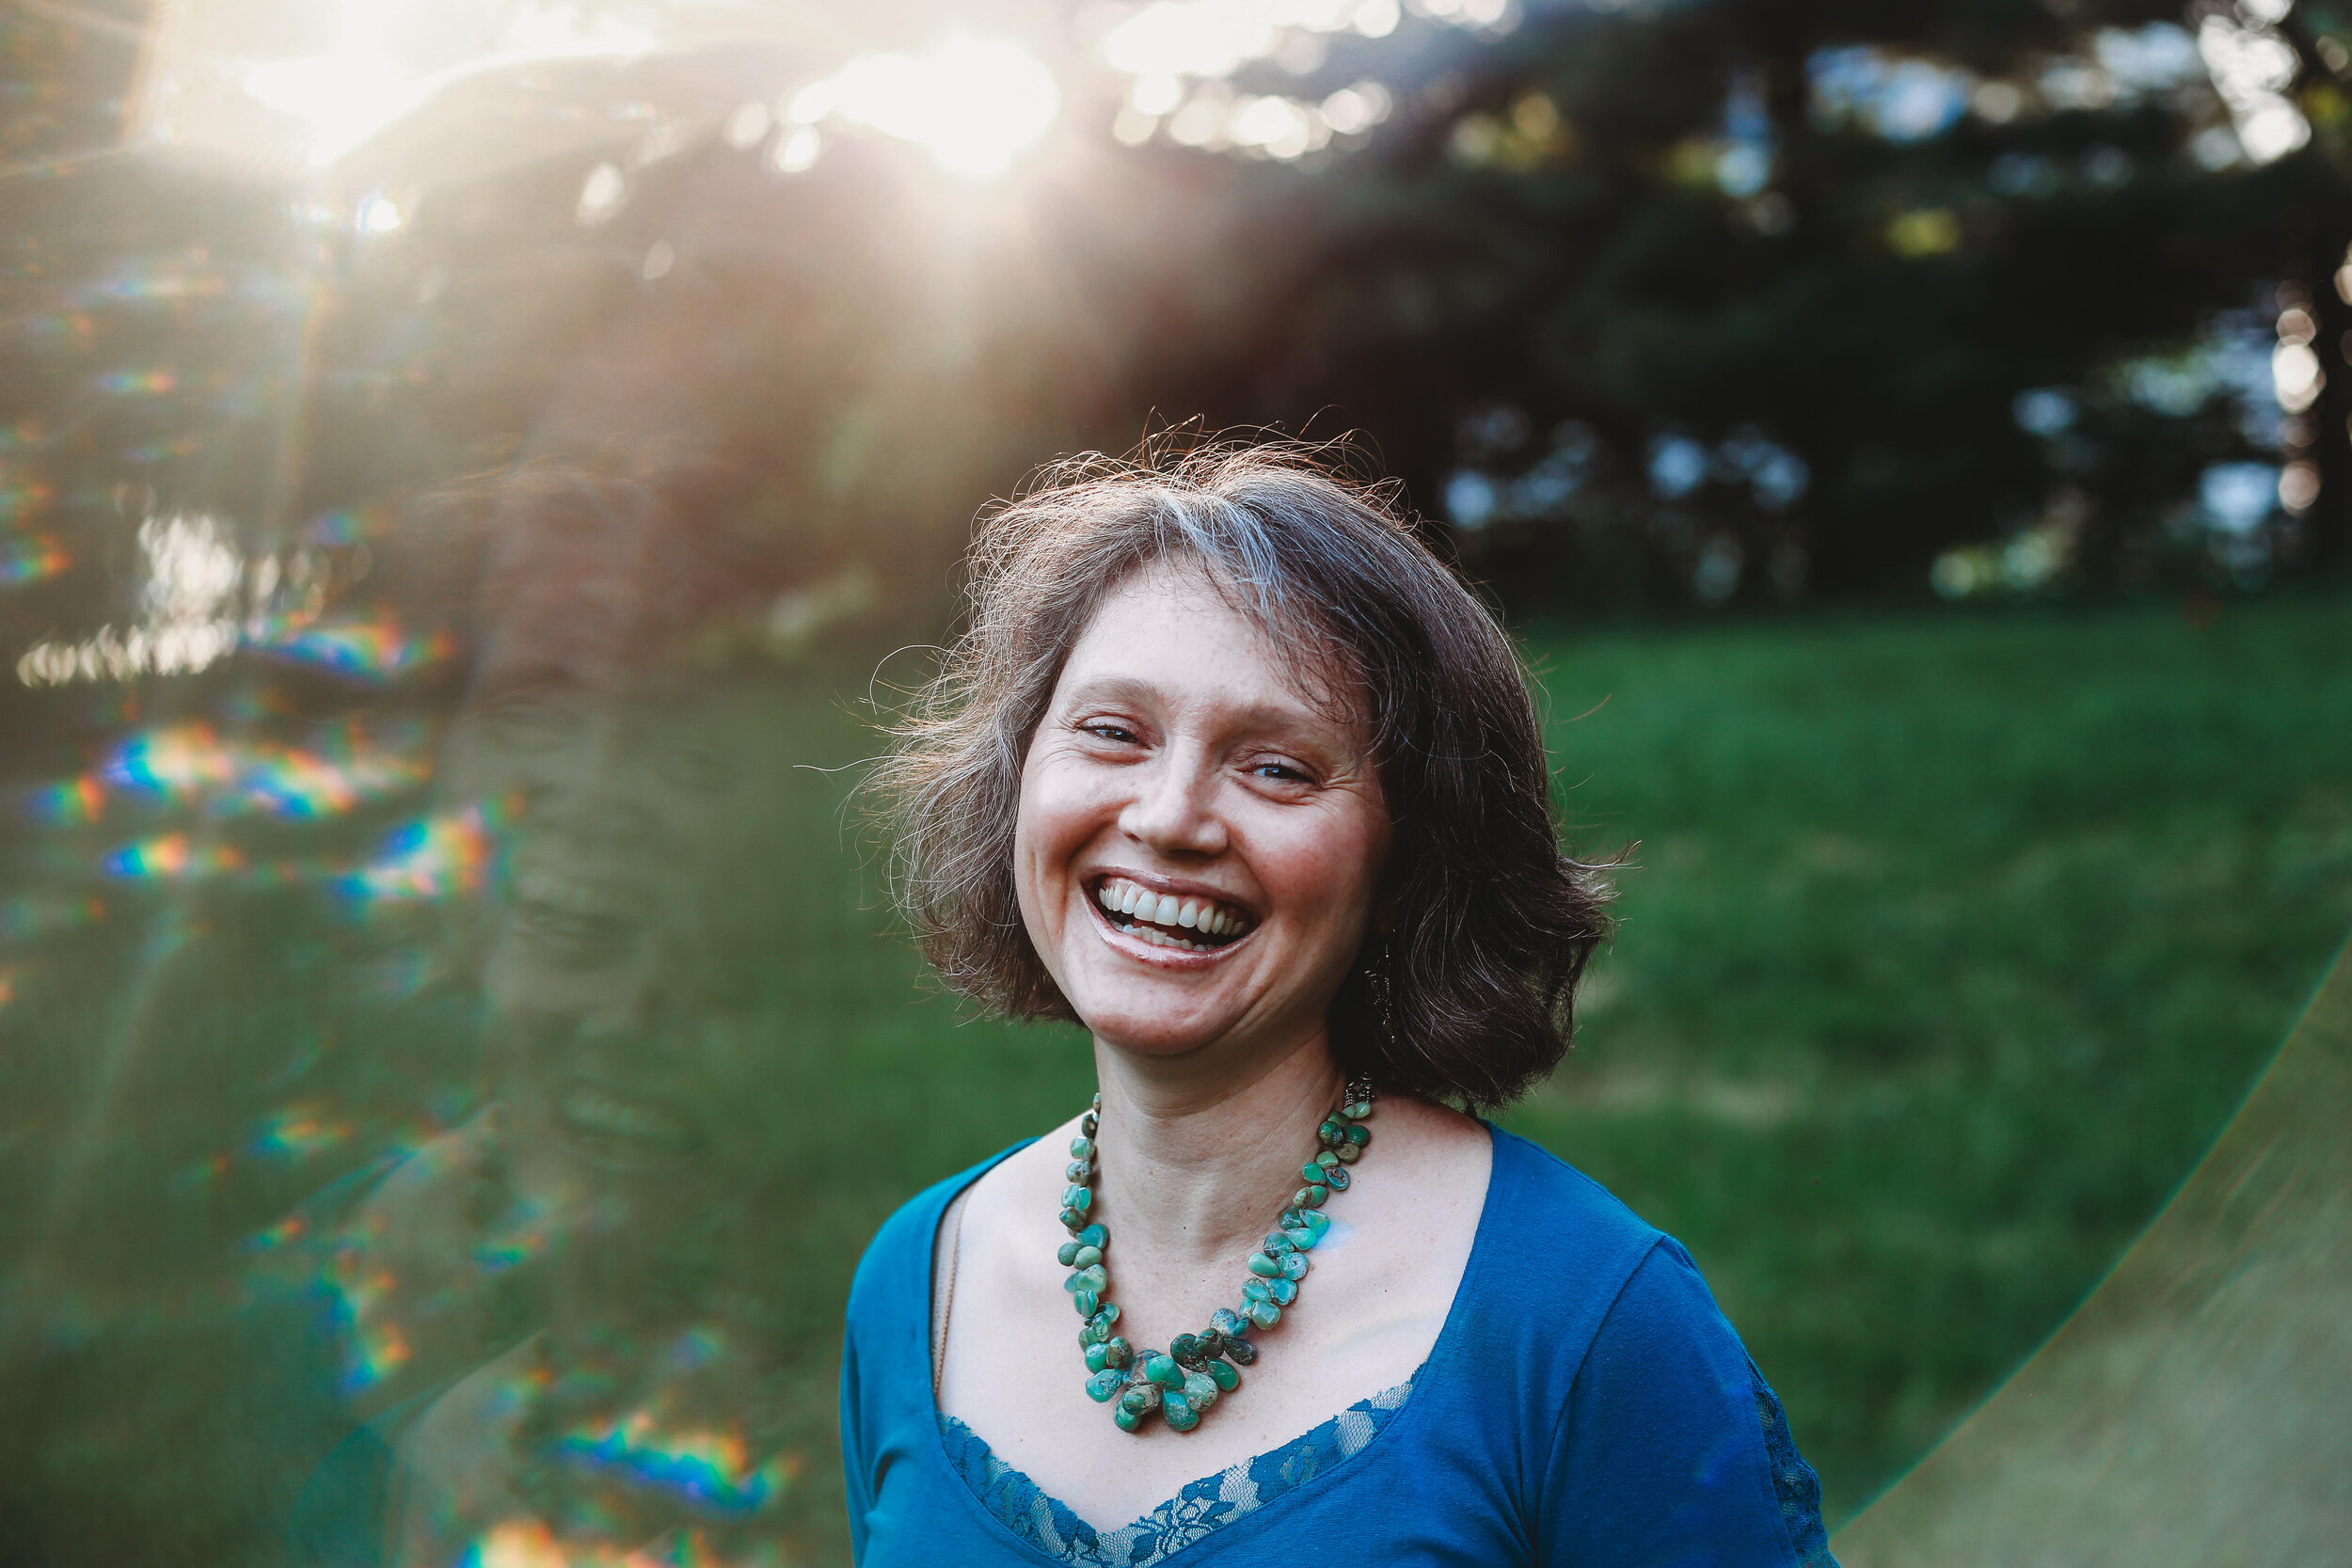   Jen Frey  is a Healer, Mentor, Earth Advocate and Voice of the Plants. She is the Founder of Heart Springs Sanctuary, where she helps people deepen their connection with nature through plant communication. With over 20 years of experience with plan